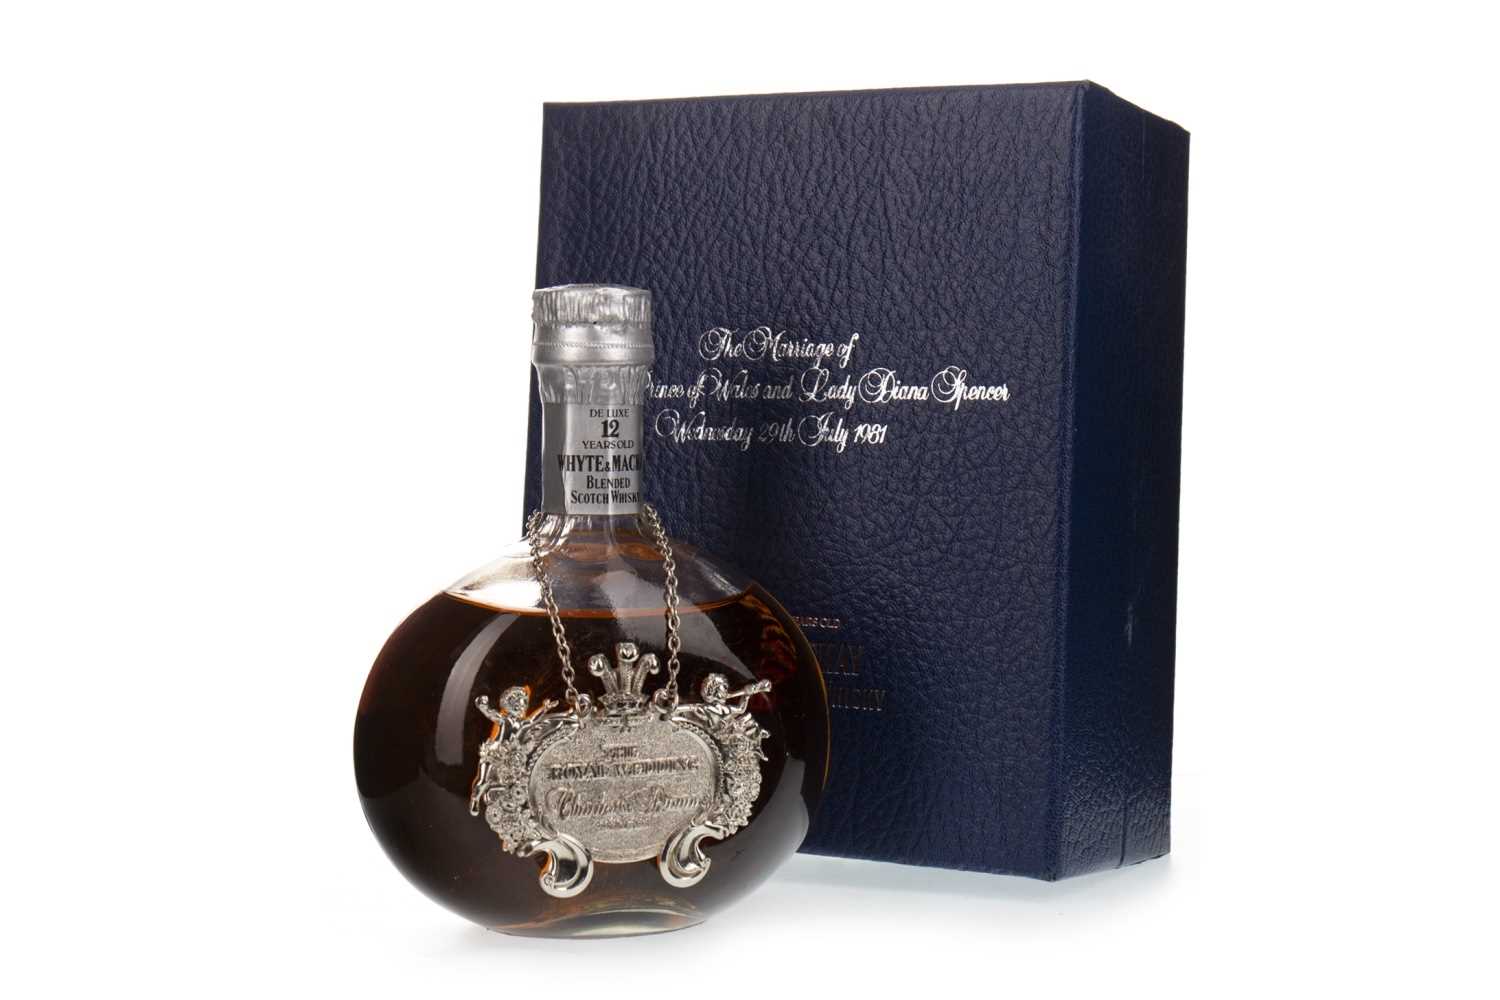 Lot 1425 - WHYTE & MACKAY ROYAL WEDDING 12 YEARS OLD